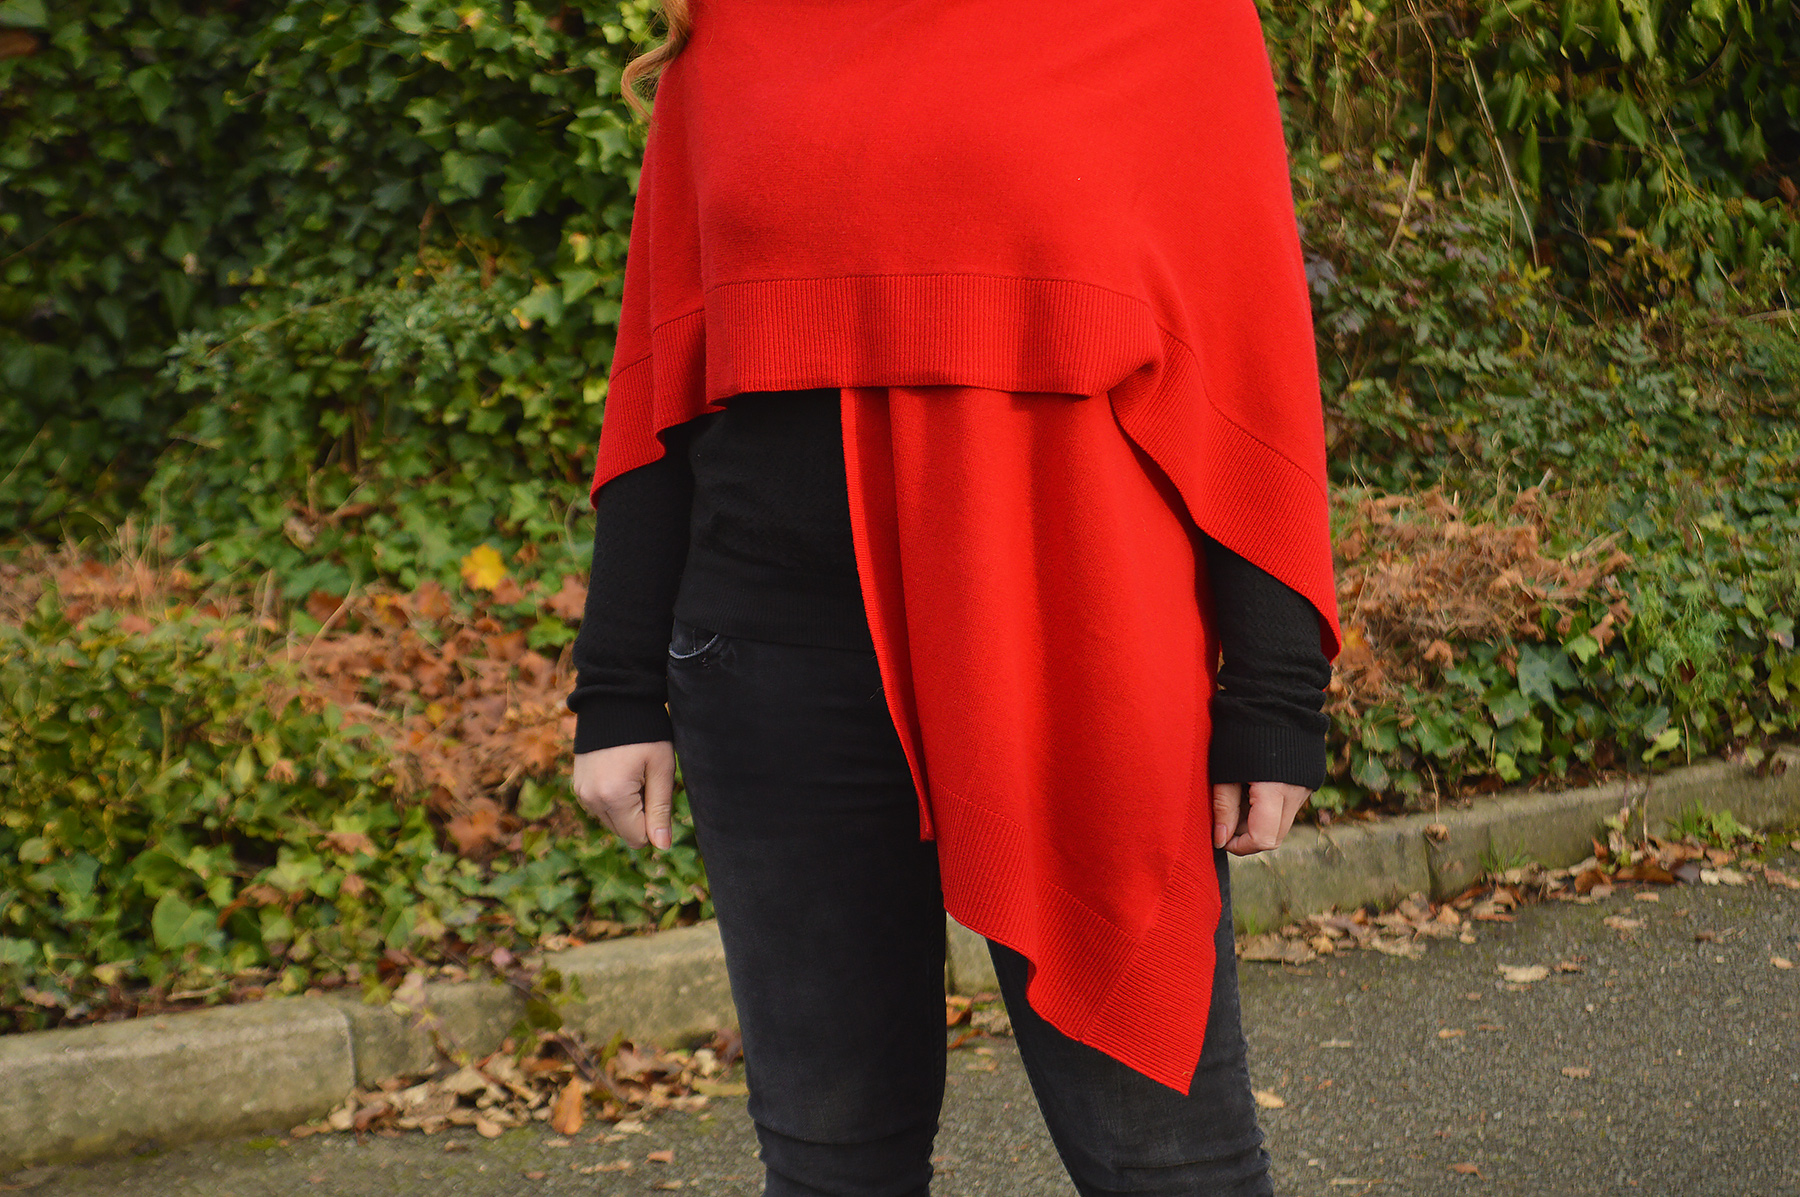 red cashmere scarf